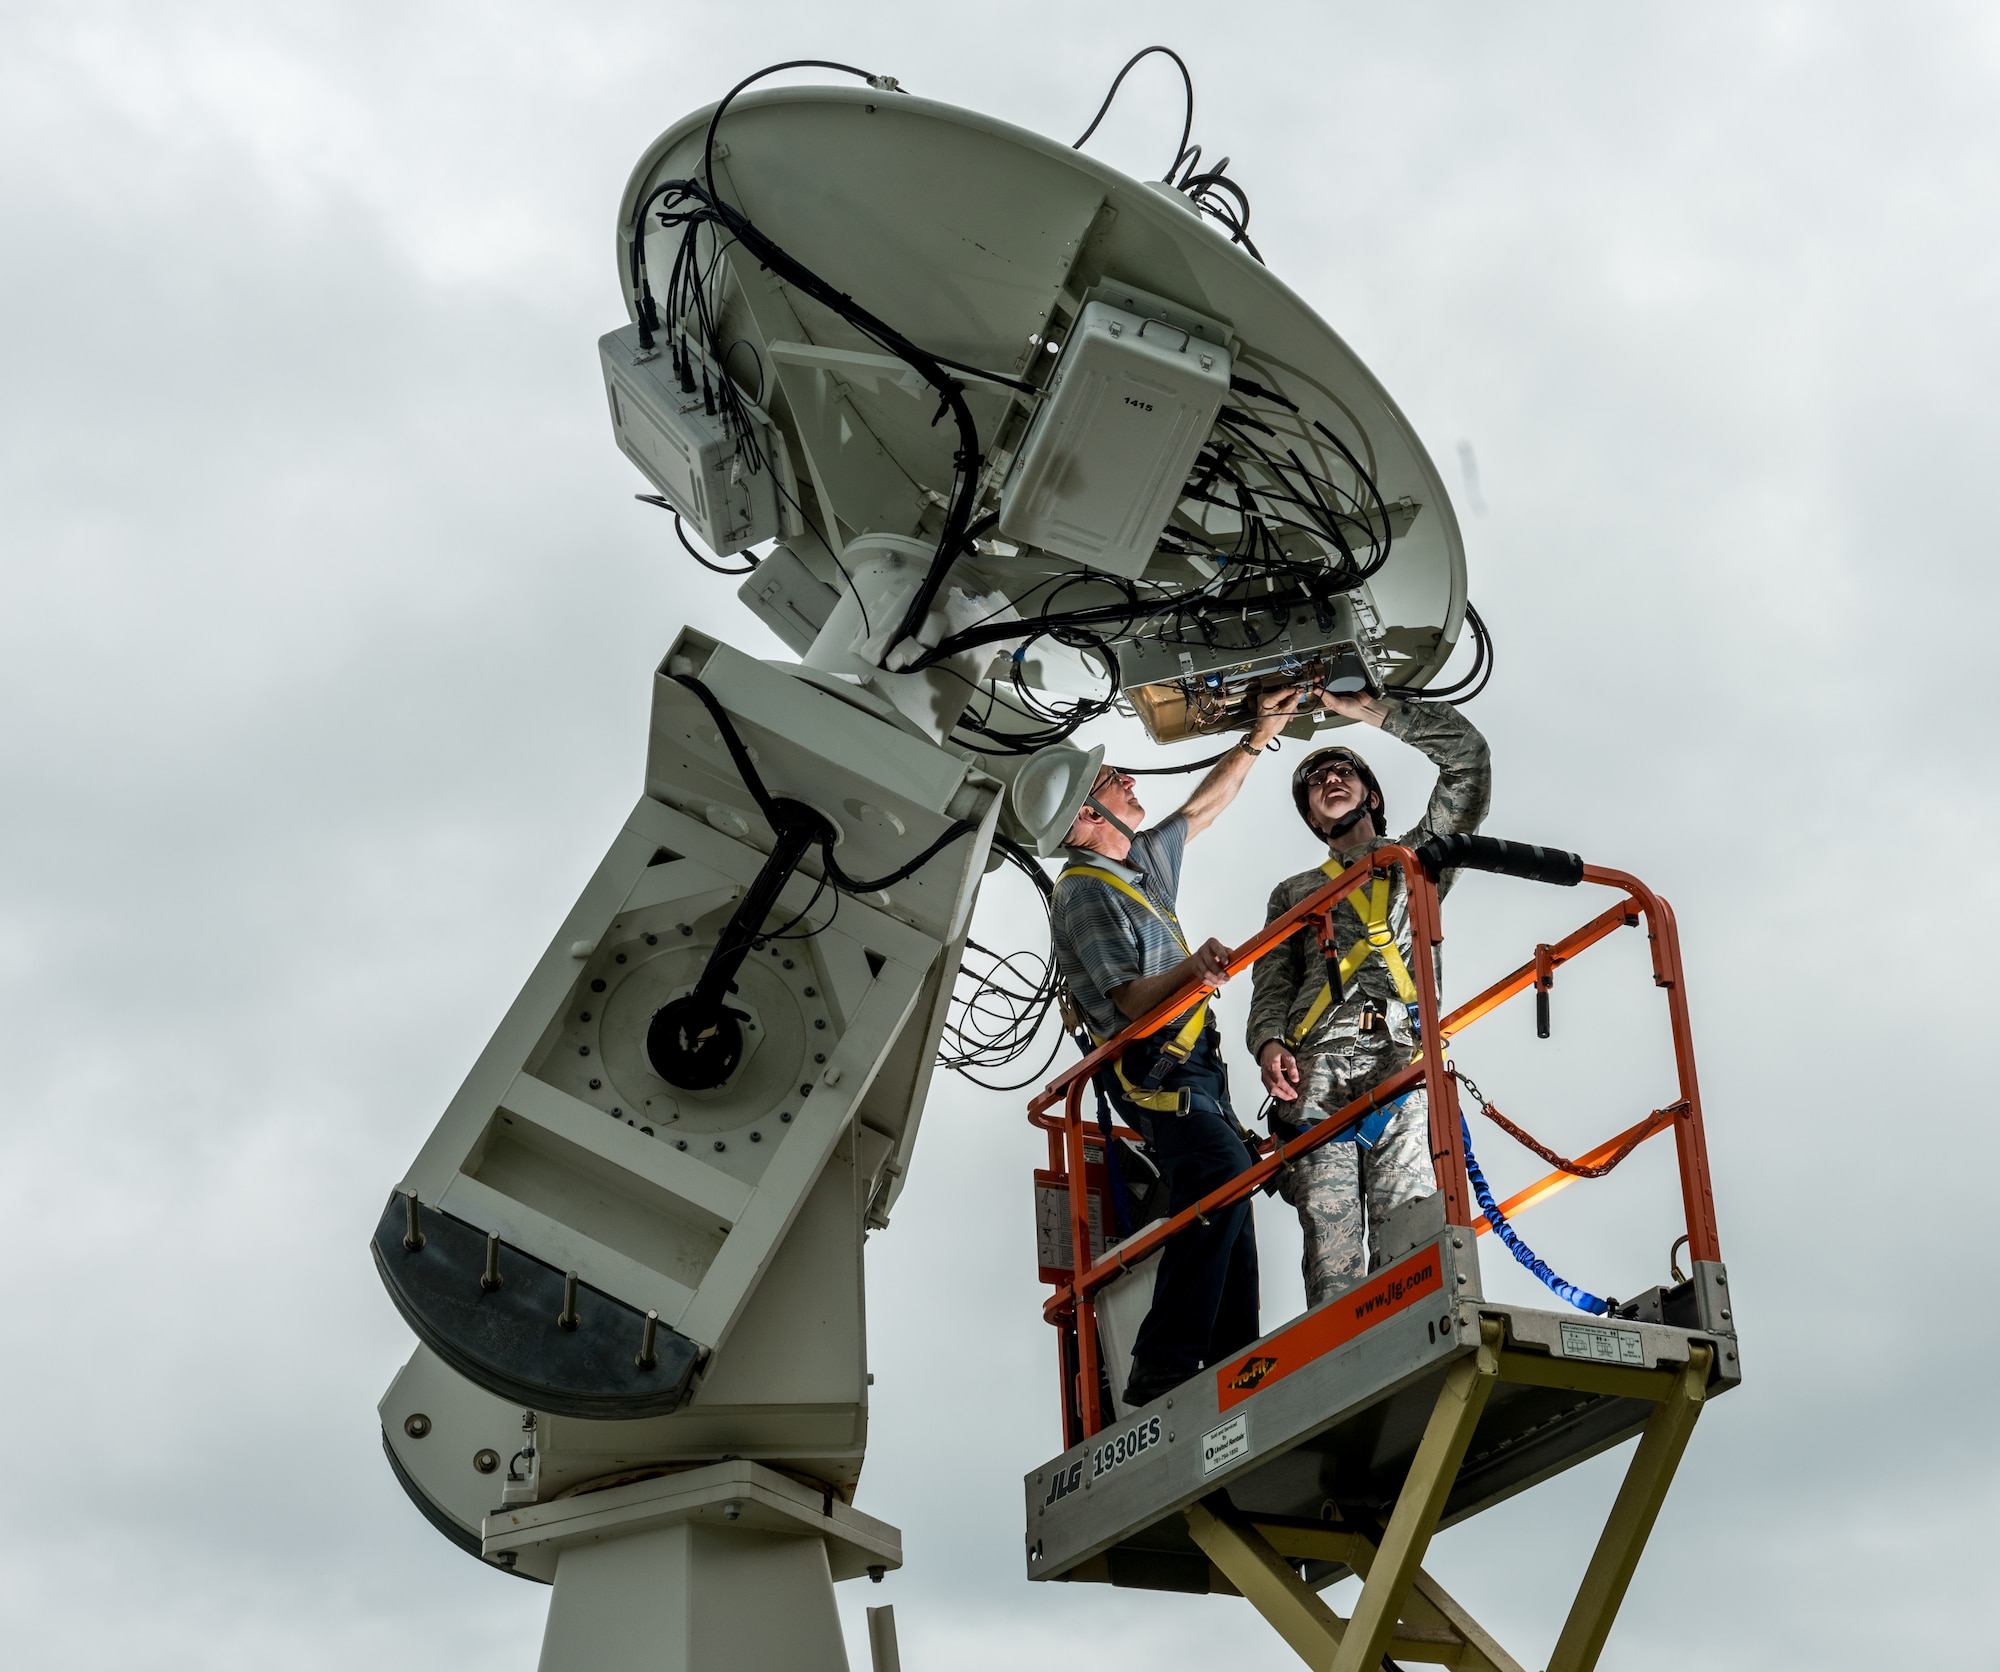 Retired U.S. Air Force Master Sgt. Daniel Holmes, right, and Tech. Sgt. Kyle Duley, maintenance NCIOC, perform maintenance on a radio telescope dish at the Sagamore Hill Solar Observatory of the 2nd Weather Squadron, Det. 2, in Hamilton, Mass., Jun. 1, 2018. The 2nd WS, headquartered at Offutt Air Force Base, Neb., operates four solar observatories around the globe which enable constant monitoring of the sun for solar phenomenon which may interfere with electronics and communications used by the Department of Defense. (U.S. Air Force photo by J.M. Eddins Jr.)